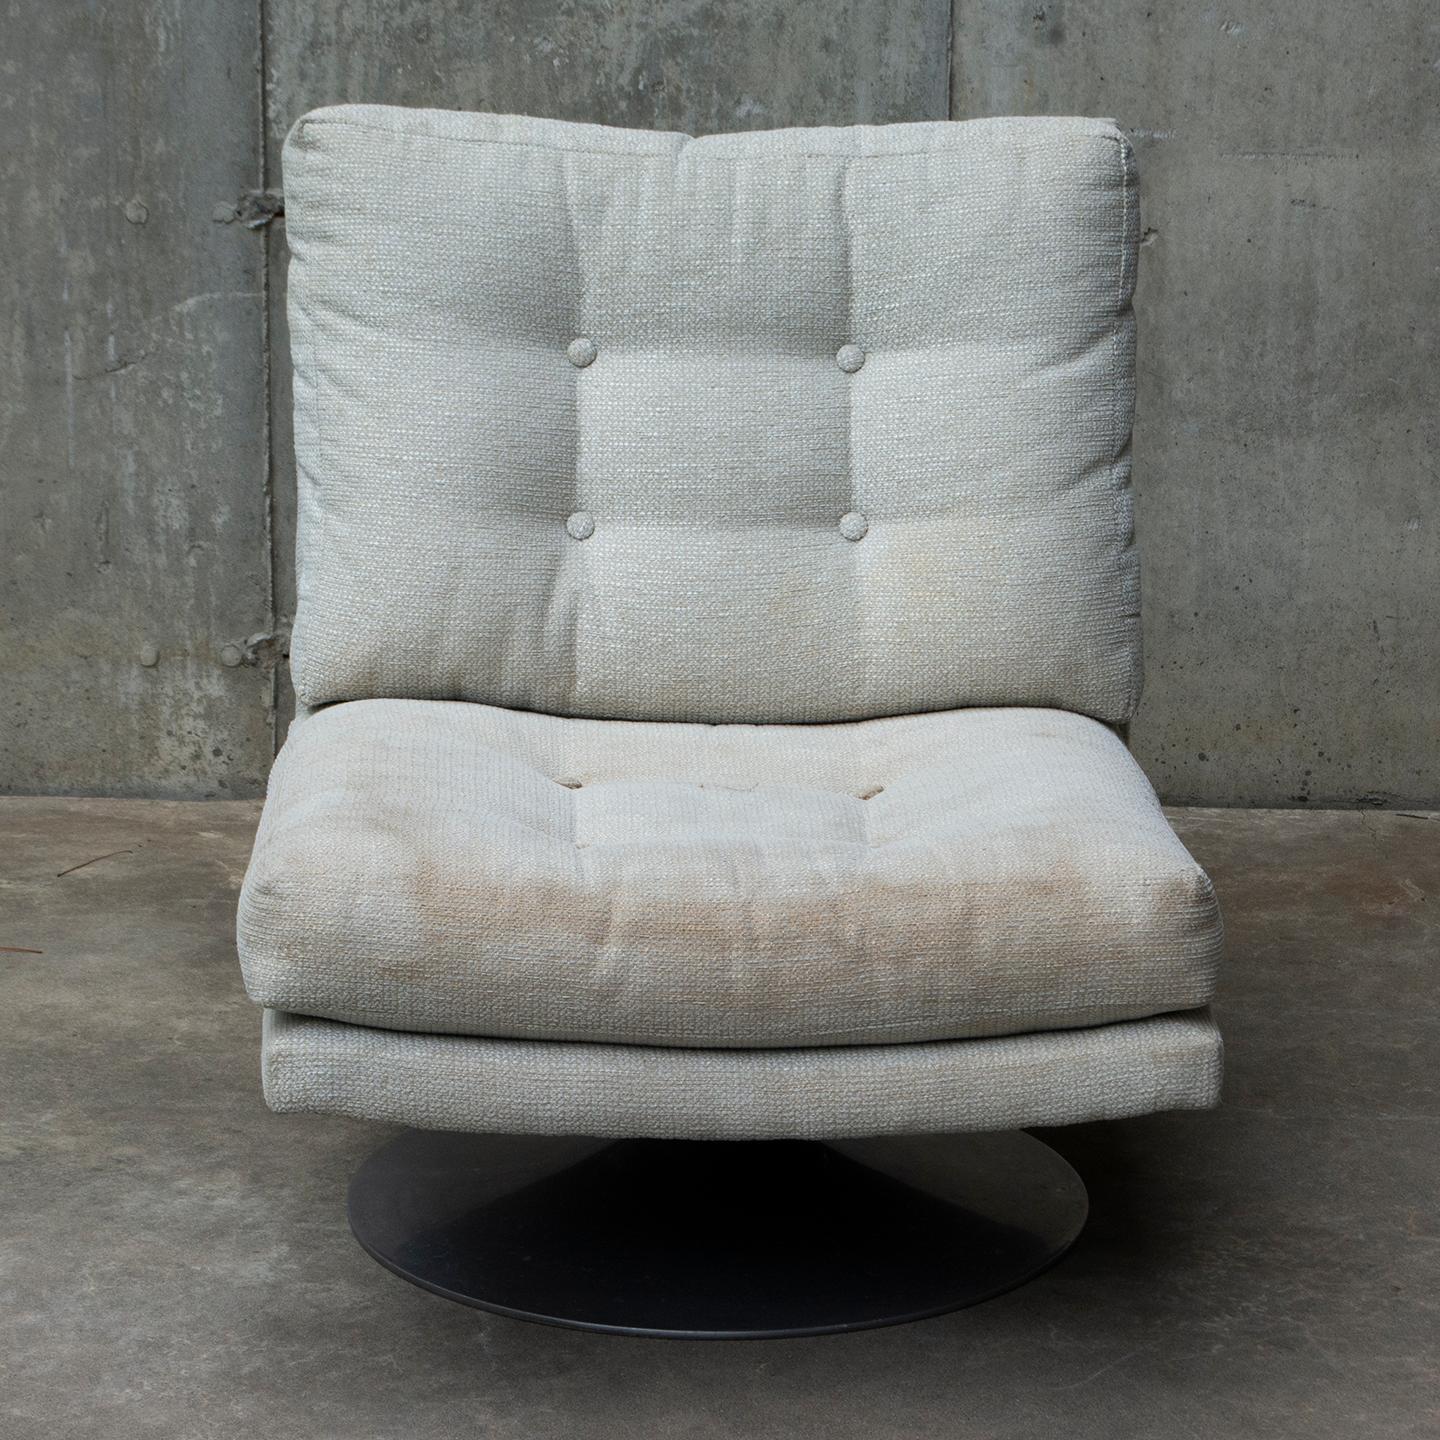 Offering a unique pair of mid-century modern swivel lounge chairs in the style of Geoffrey Harcourt. Buttoned padded seating in soft gray chenille upholstery with a black metal base. Aesthetically tasteful in both color and style. While the fabric